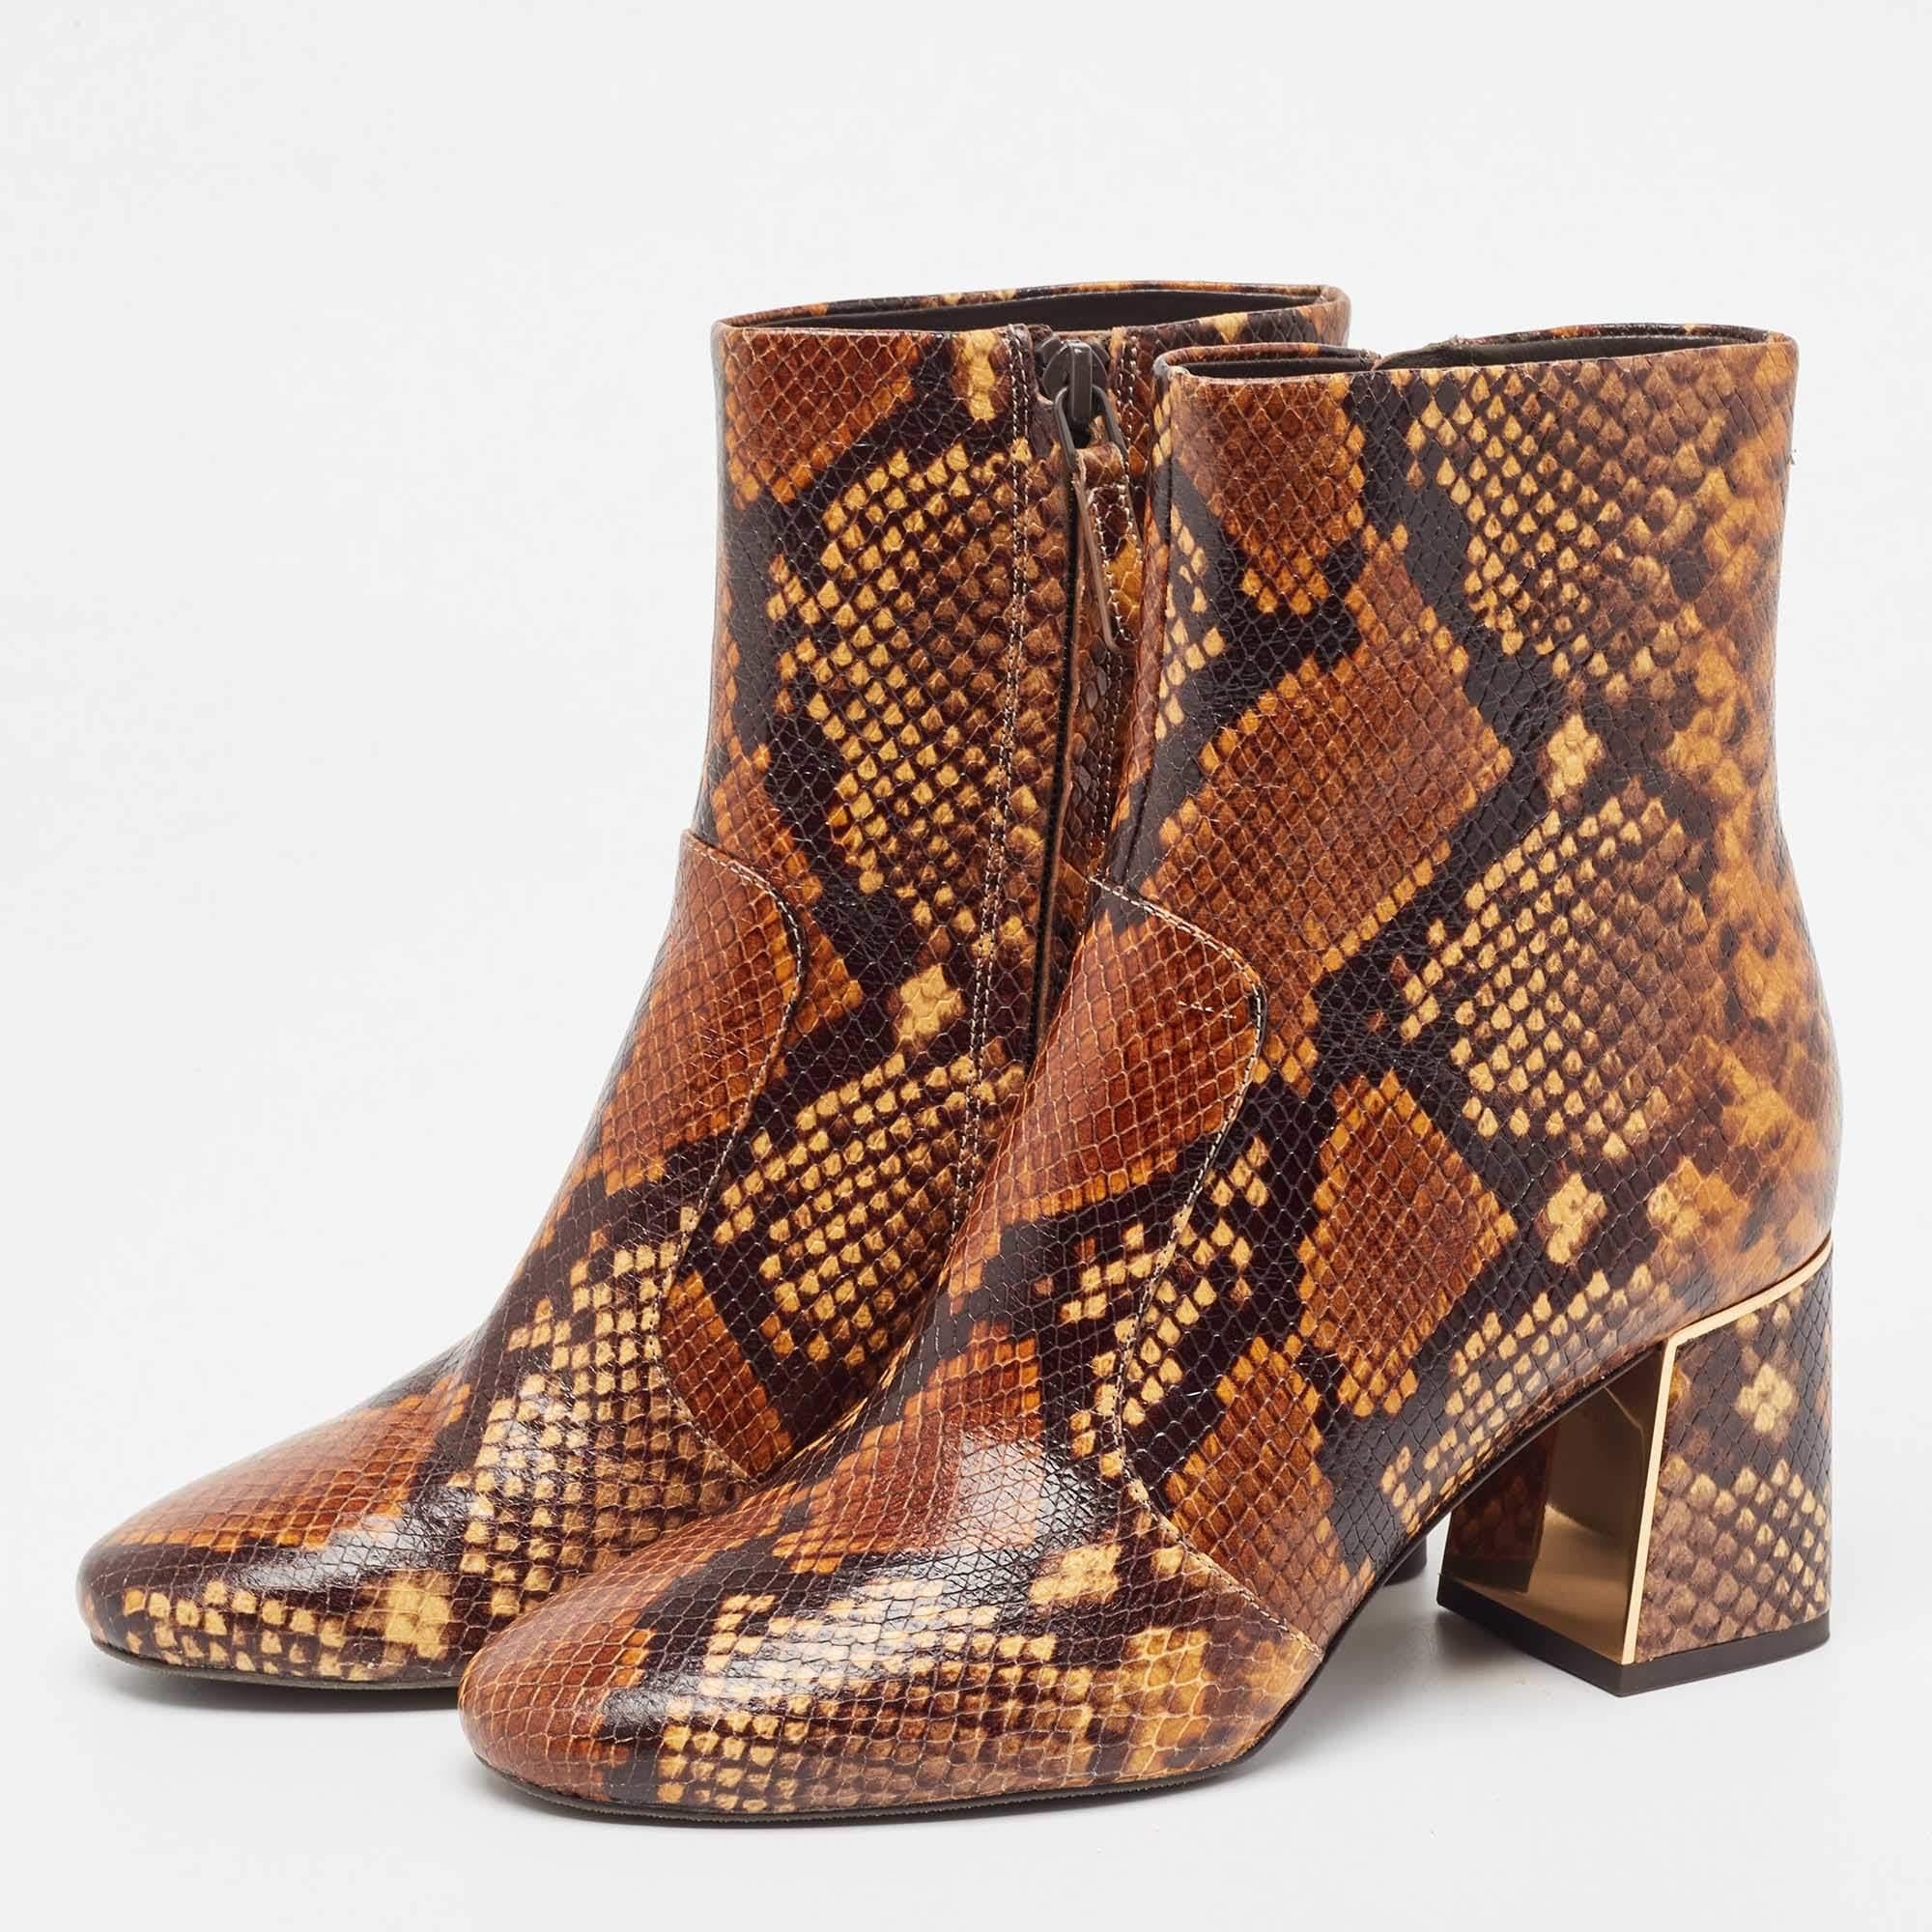 Tory Burch Brown Python Embossed Leather Ankle Boots Size 37.5 5